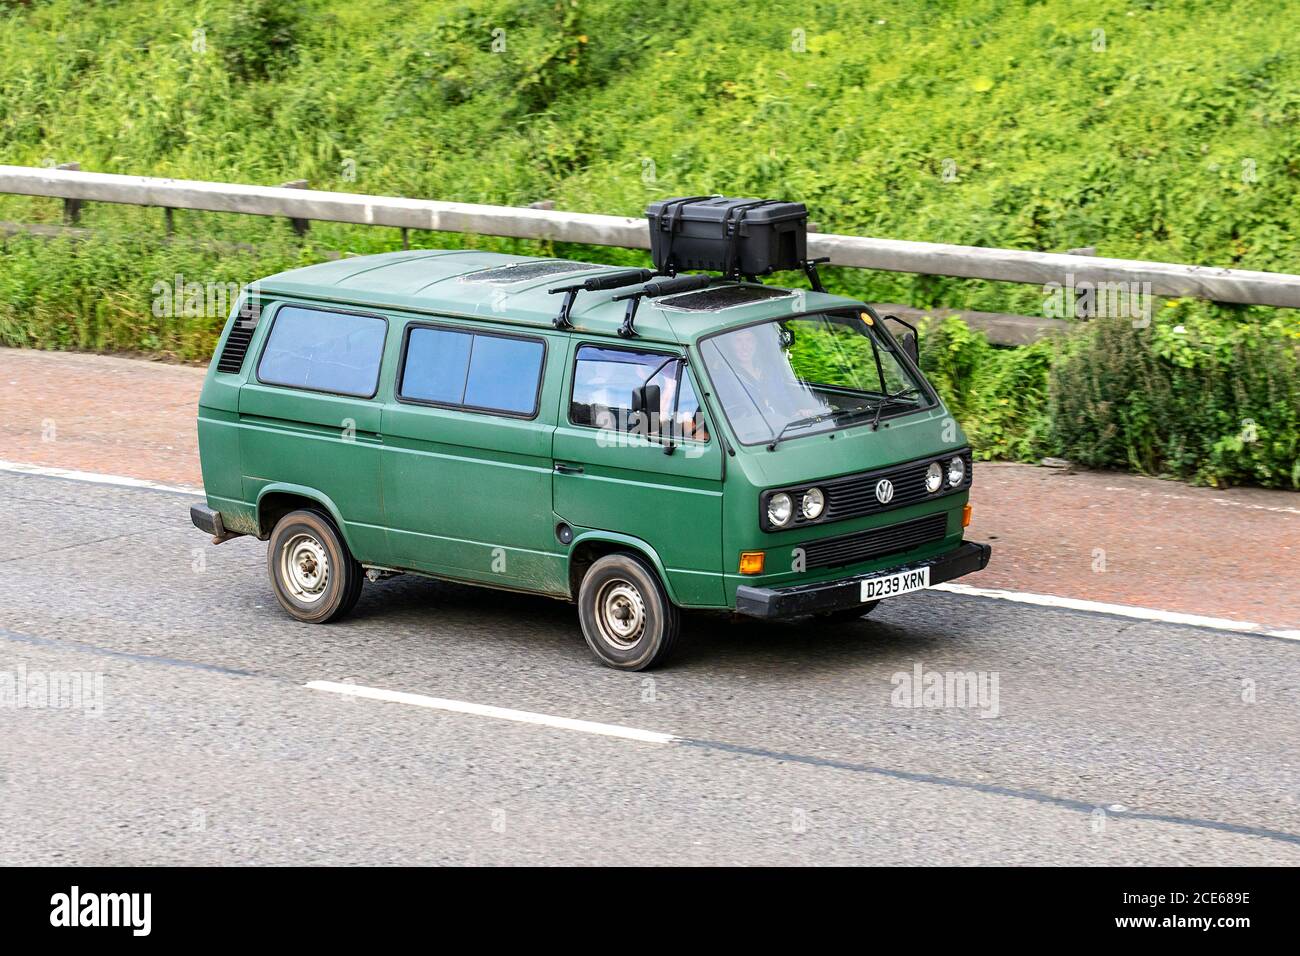 1997 90s green Volkswagen Transporter 78Ps; Caravans and Motorhomes, campervans on Britain's roads, RV leisure vehicle, family holidays, caravanette vacations, Touring caravan holiday, van conversions, Vanagon autohome, life on the road, Bay Window Dormobile Stock Photo